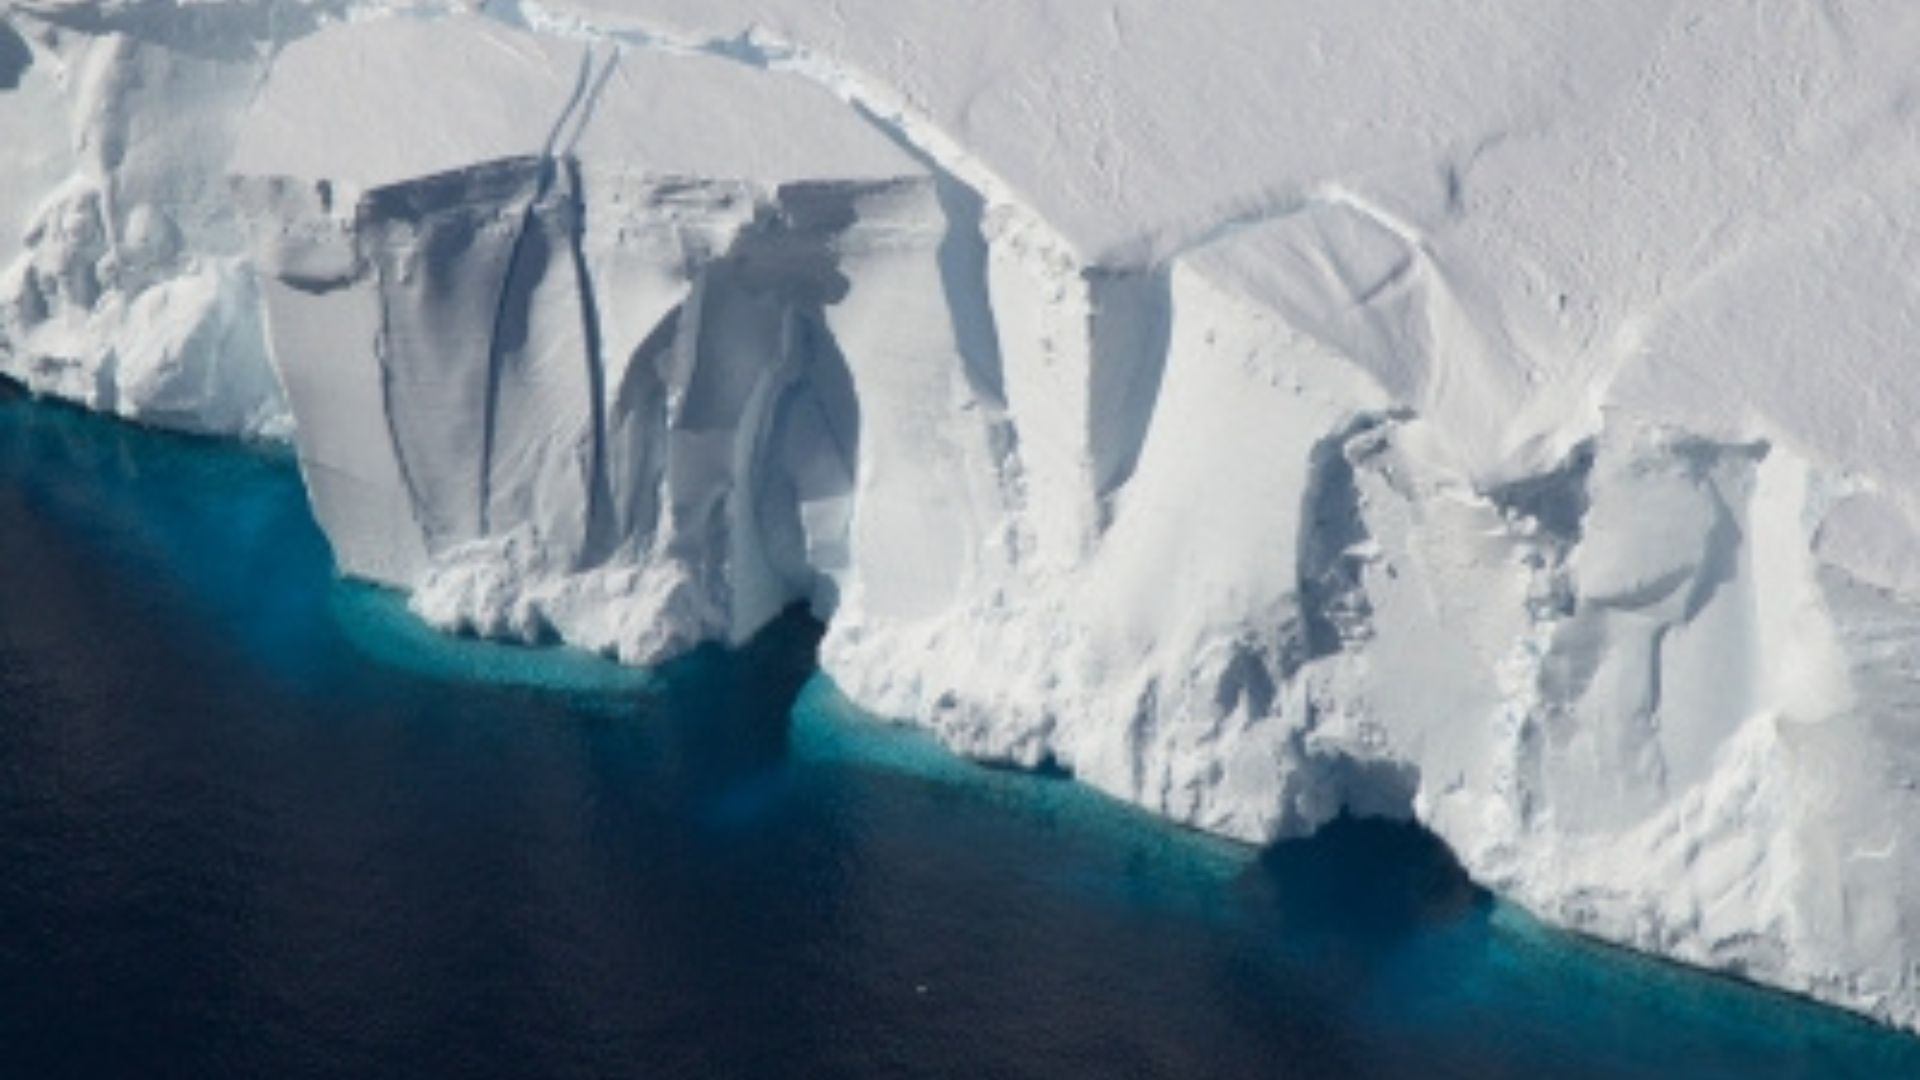 Massive Groundwater Systems Lie Beneath Antarctic Ice - Eos